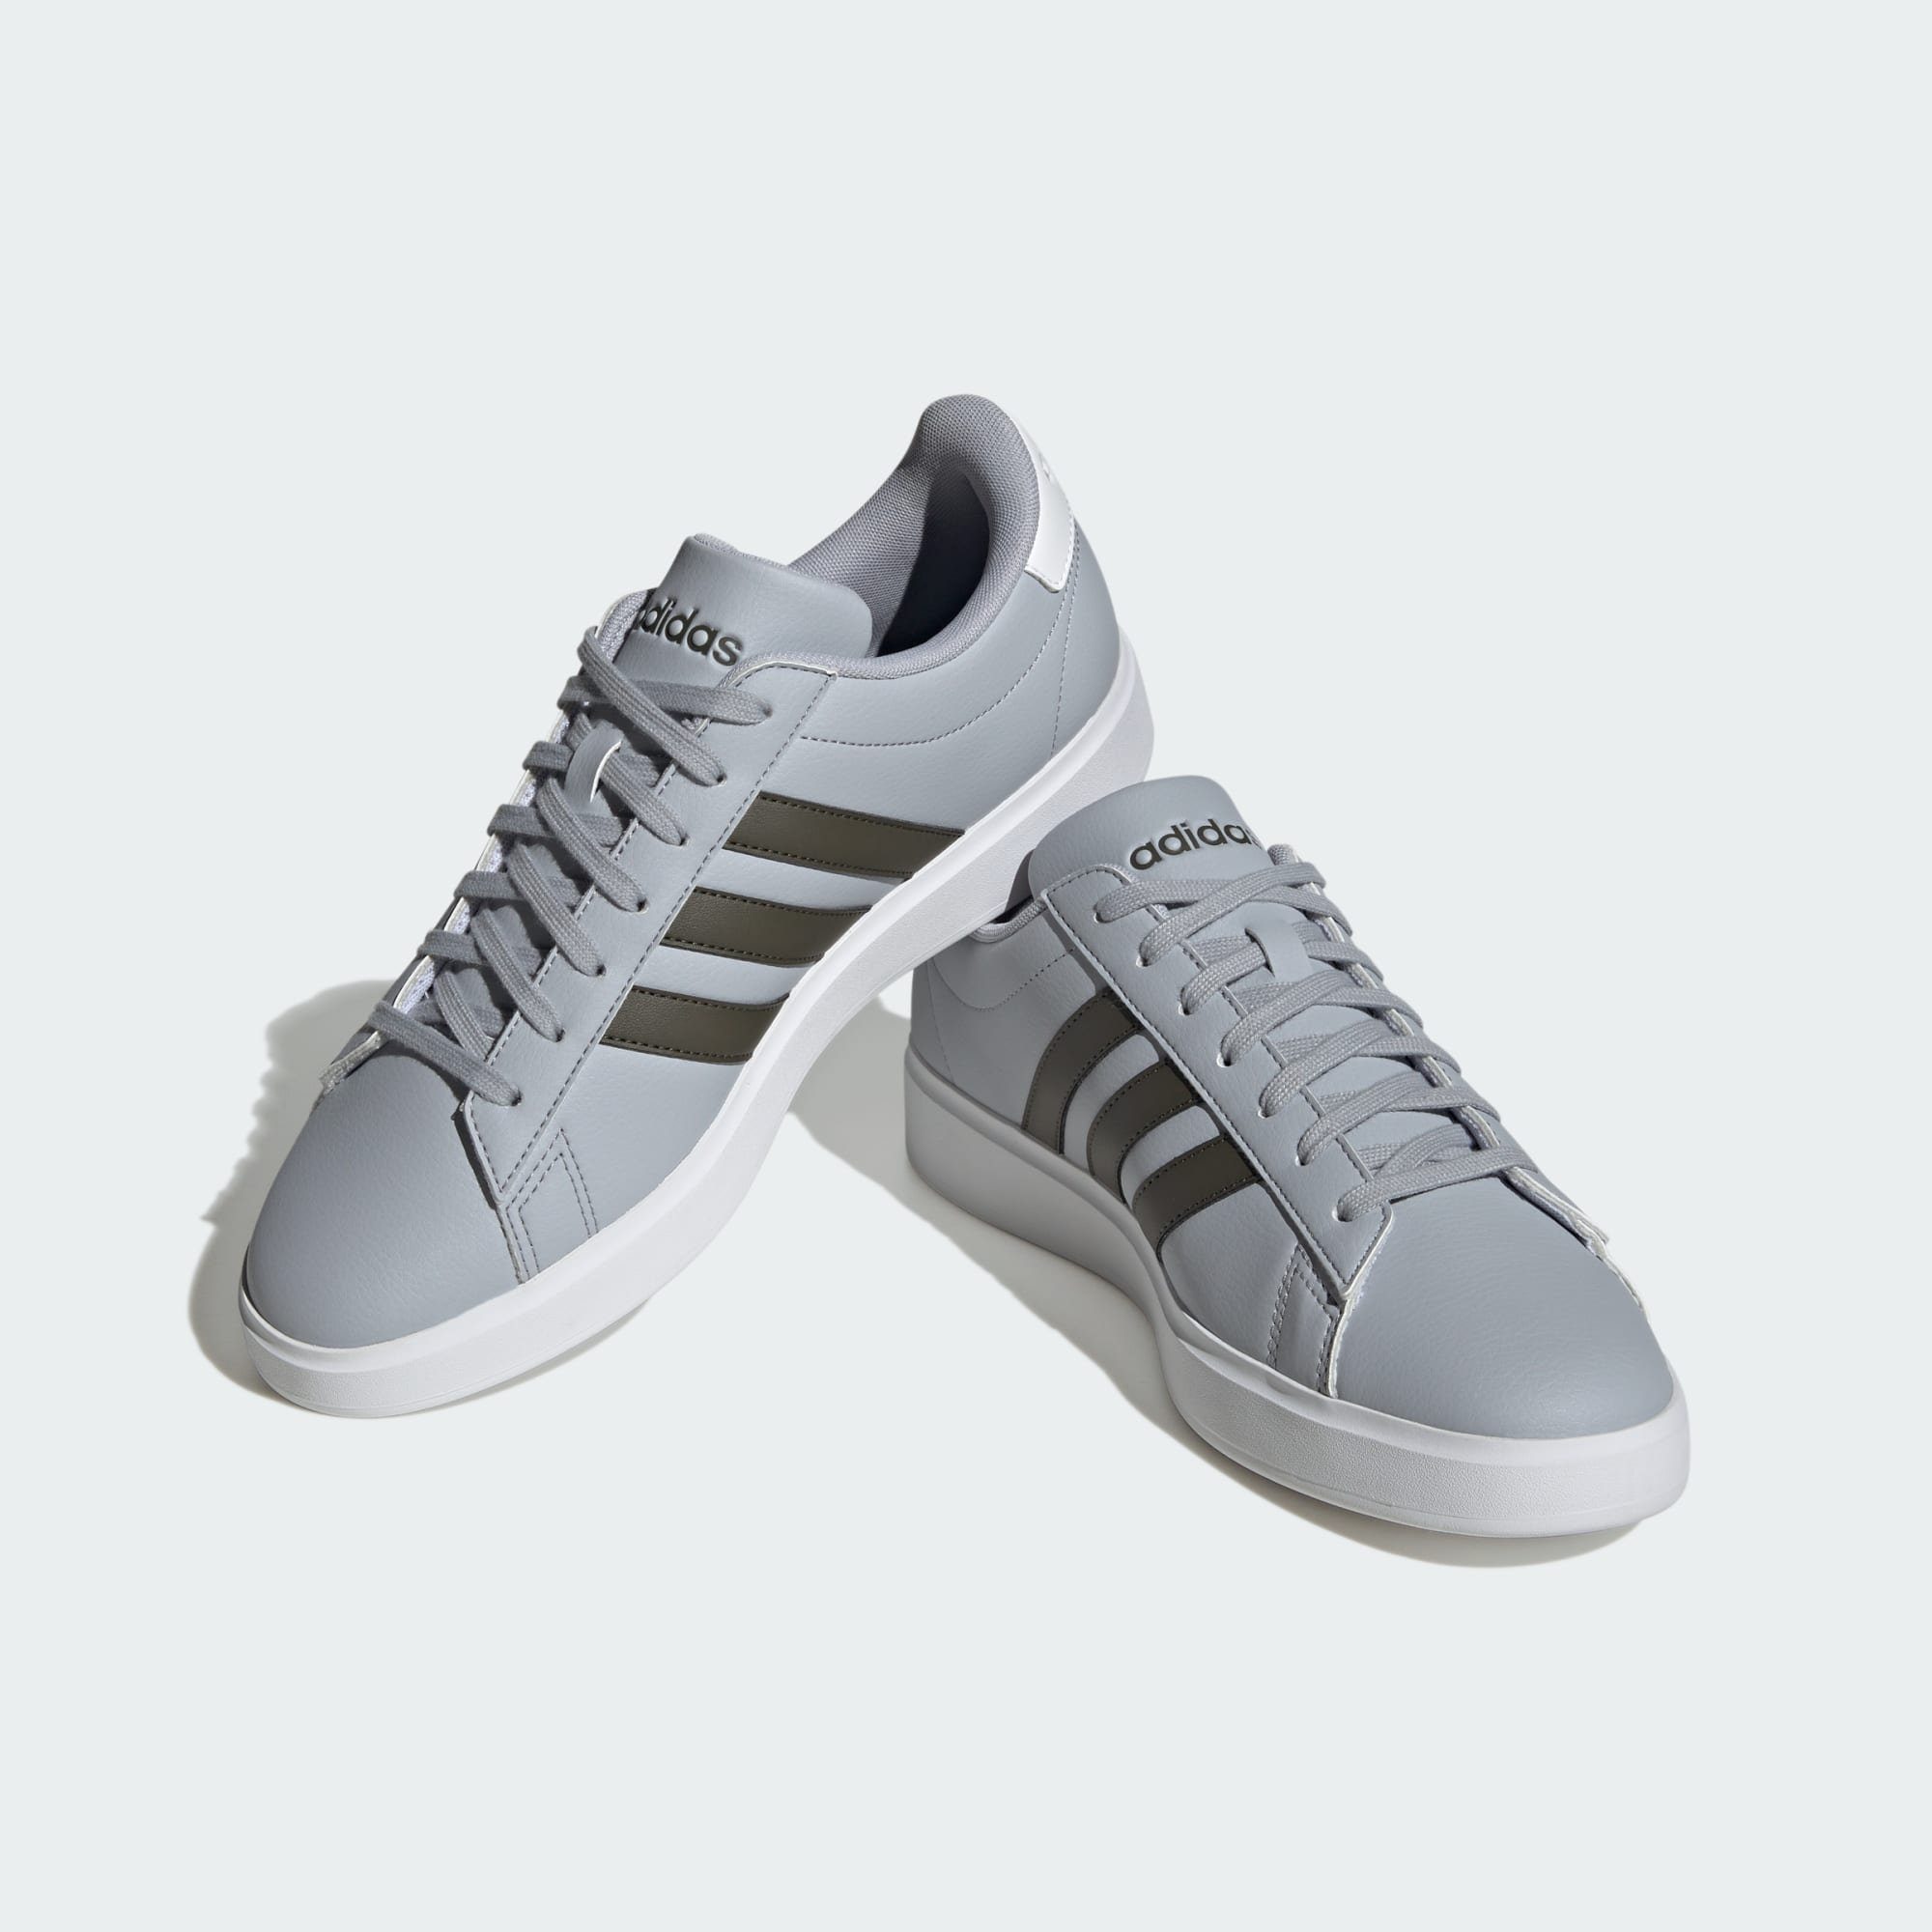 GRAND Halo CLOUDFOAM Shadow Sportswear COMFORT / Silver / Cloud Sneaker SCHUH COURT White Olive adidas